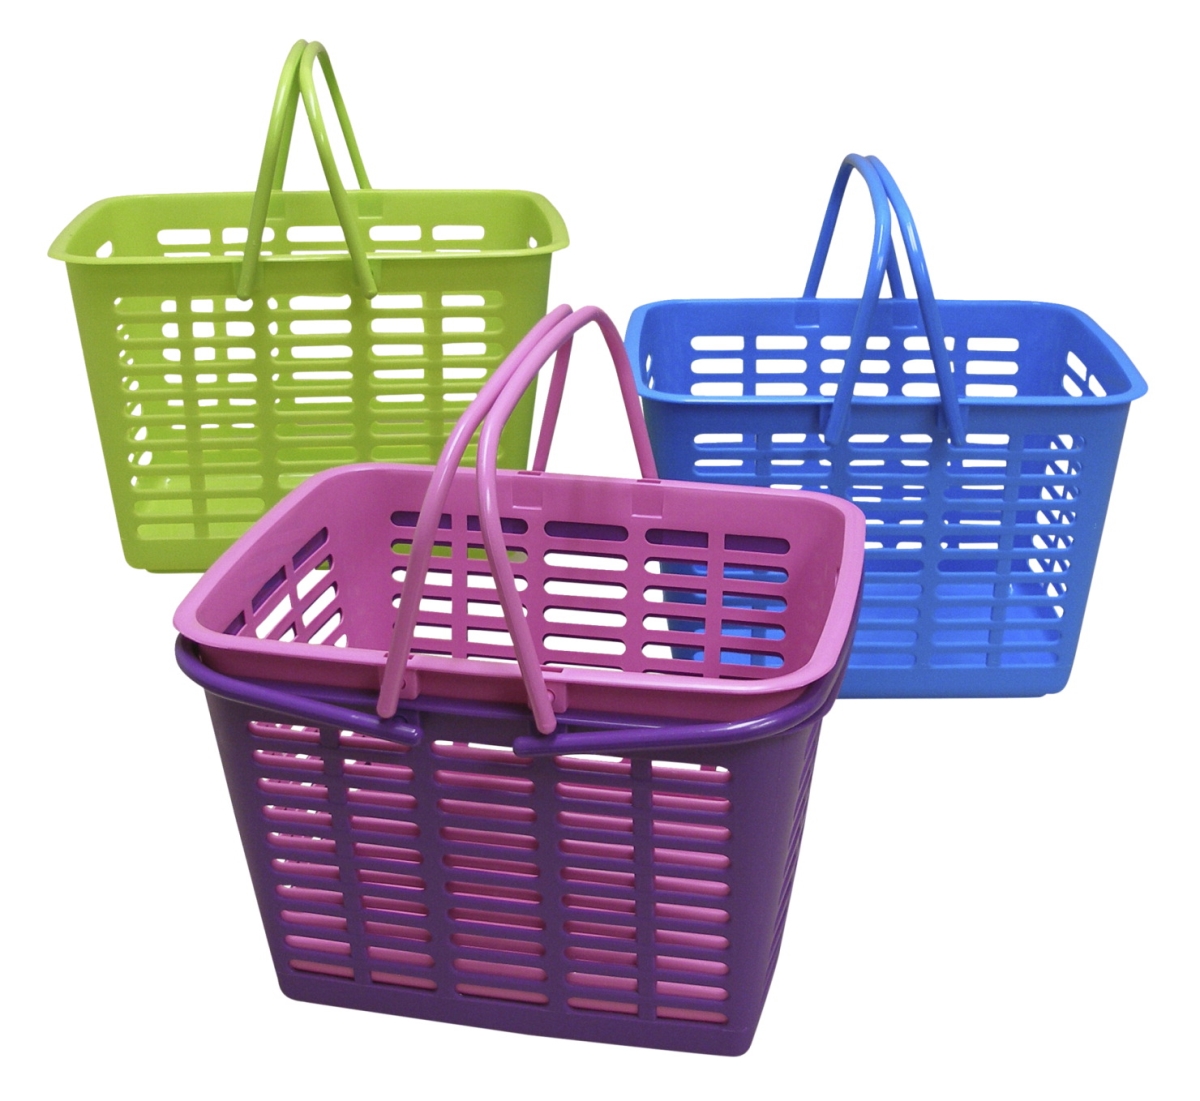 2006385 15.5 X 12 X 10.25 In. Handy Tote Basket, Assorted Color